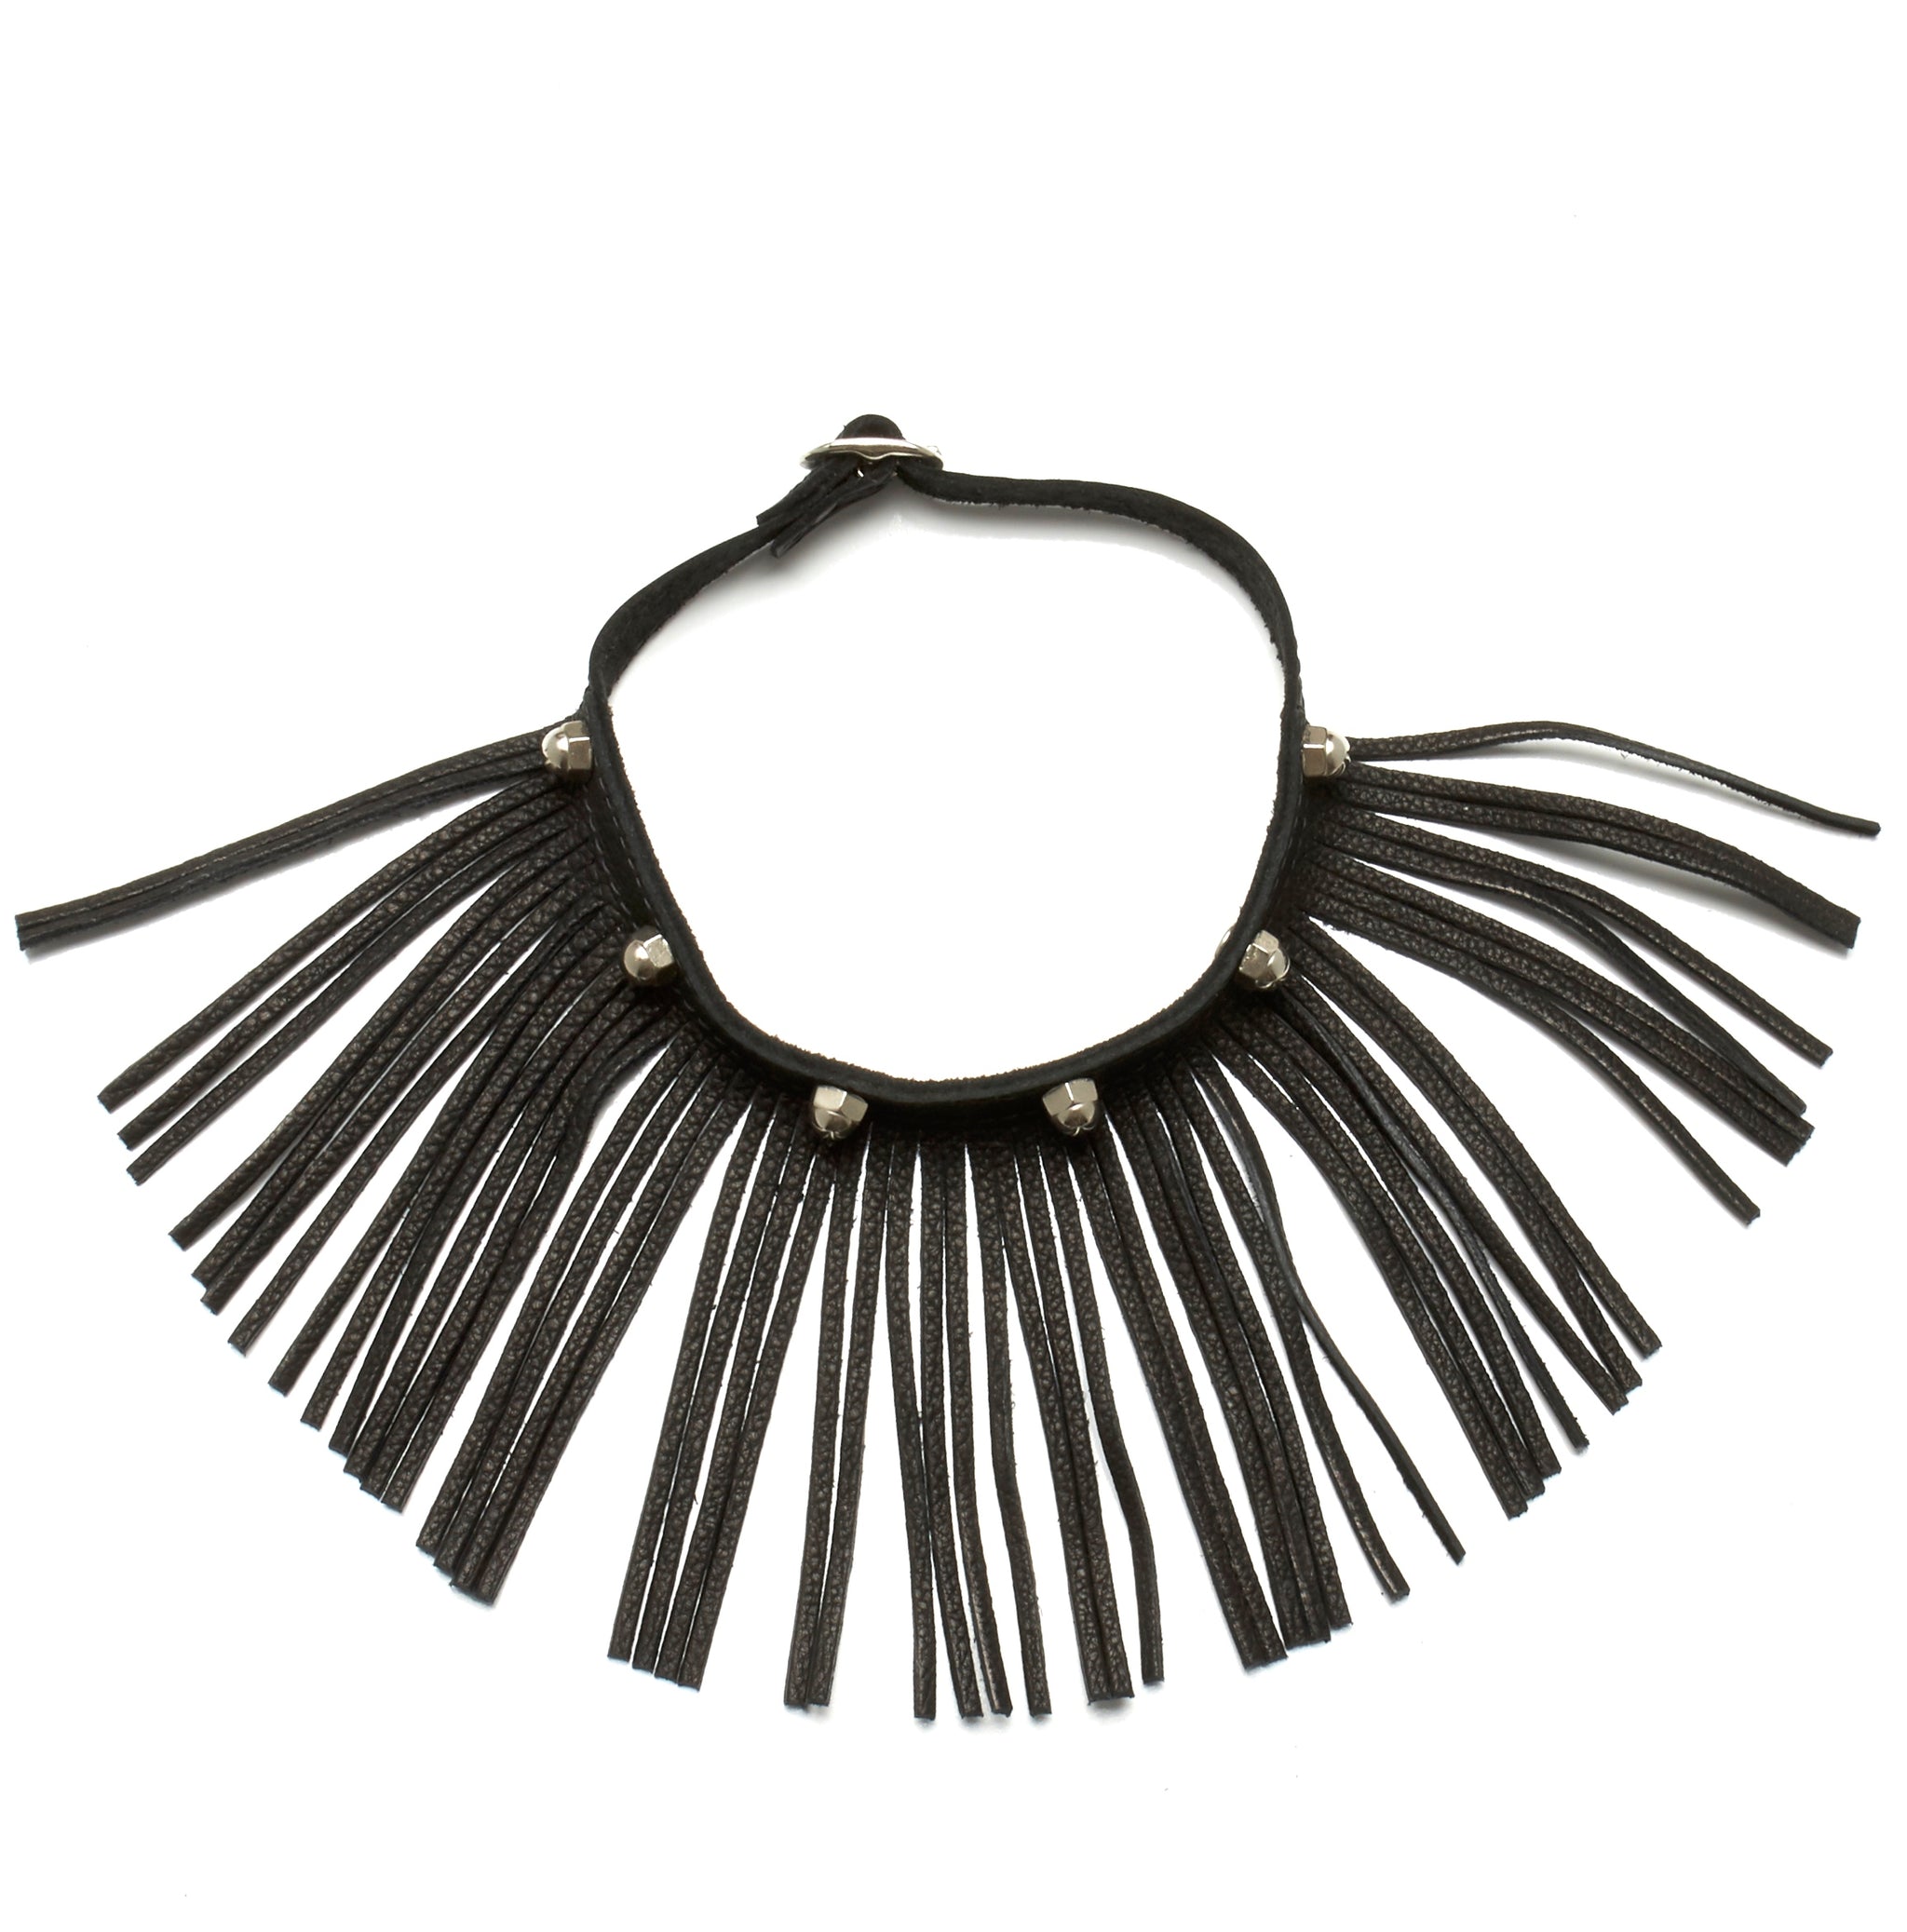 LEATHER CHOKER NECKLACE WITH DEERSKIN LEATHER FRINGE AND STAINLESS STEEL HARDWARE by nyet jewelry